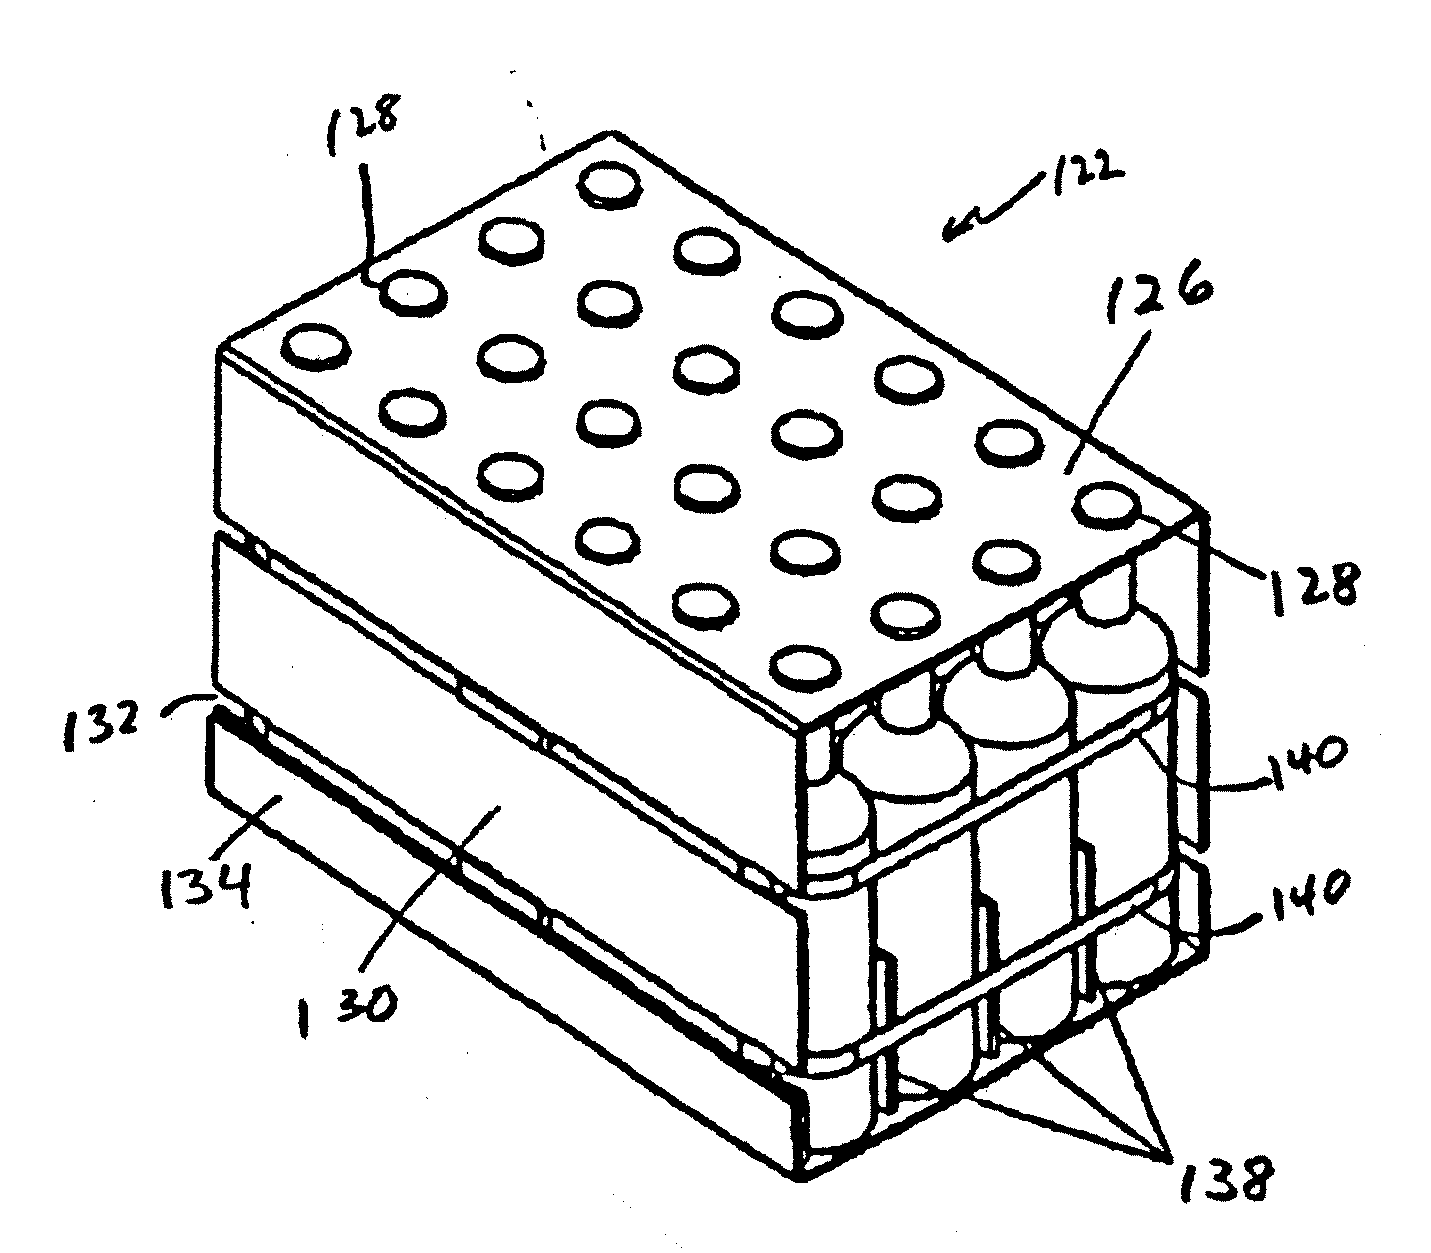 Structural Strapped Multi-Pack Packaging